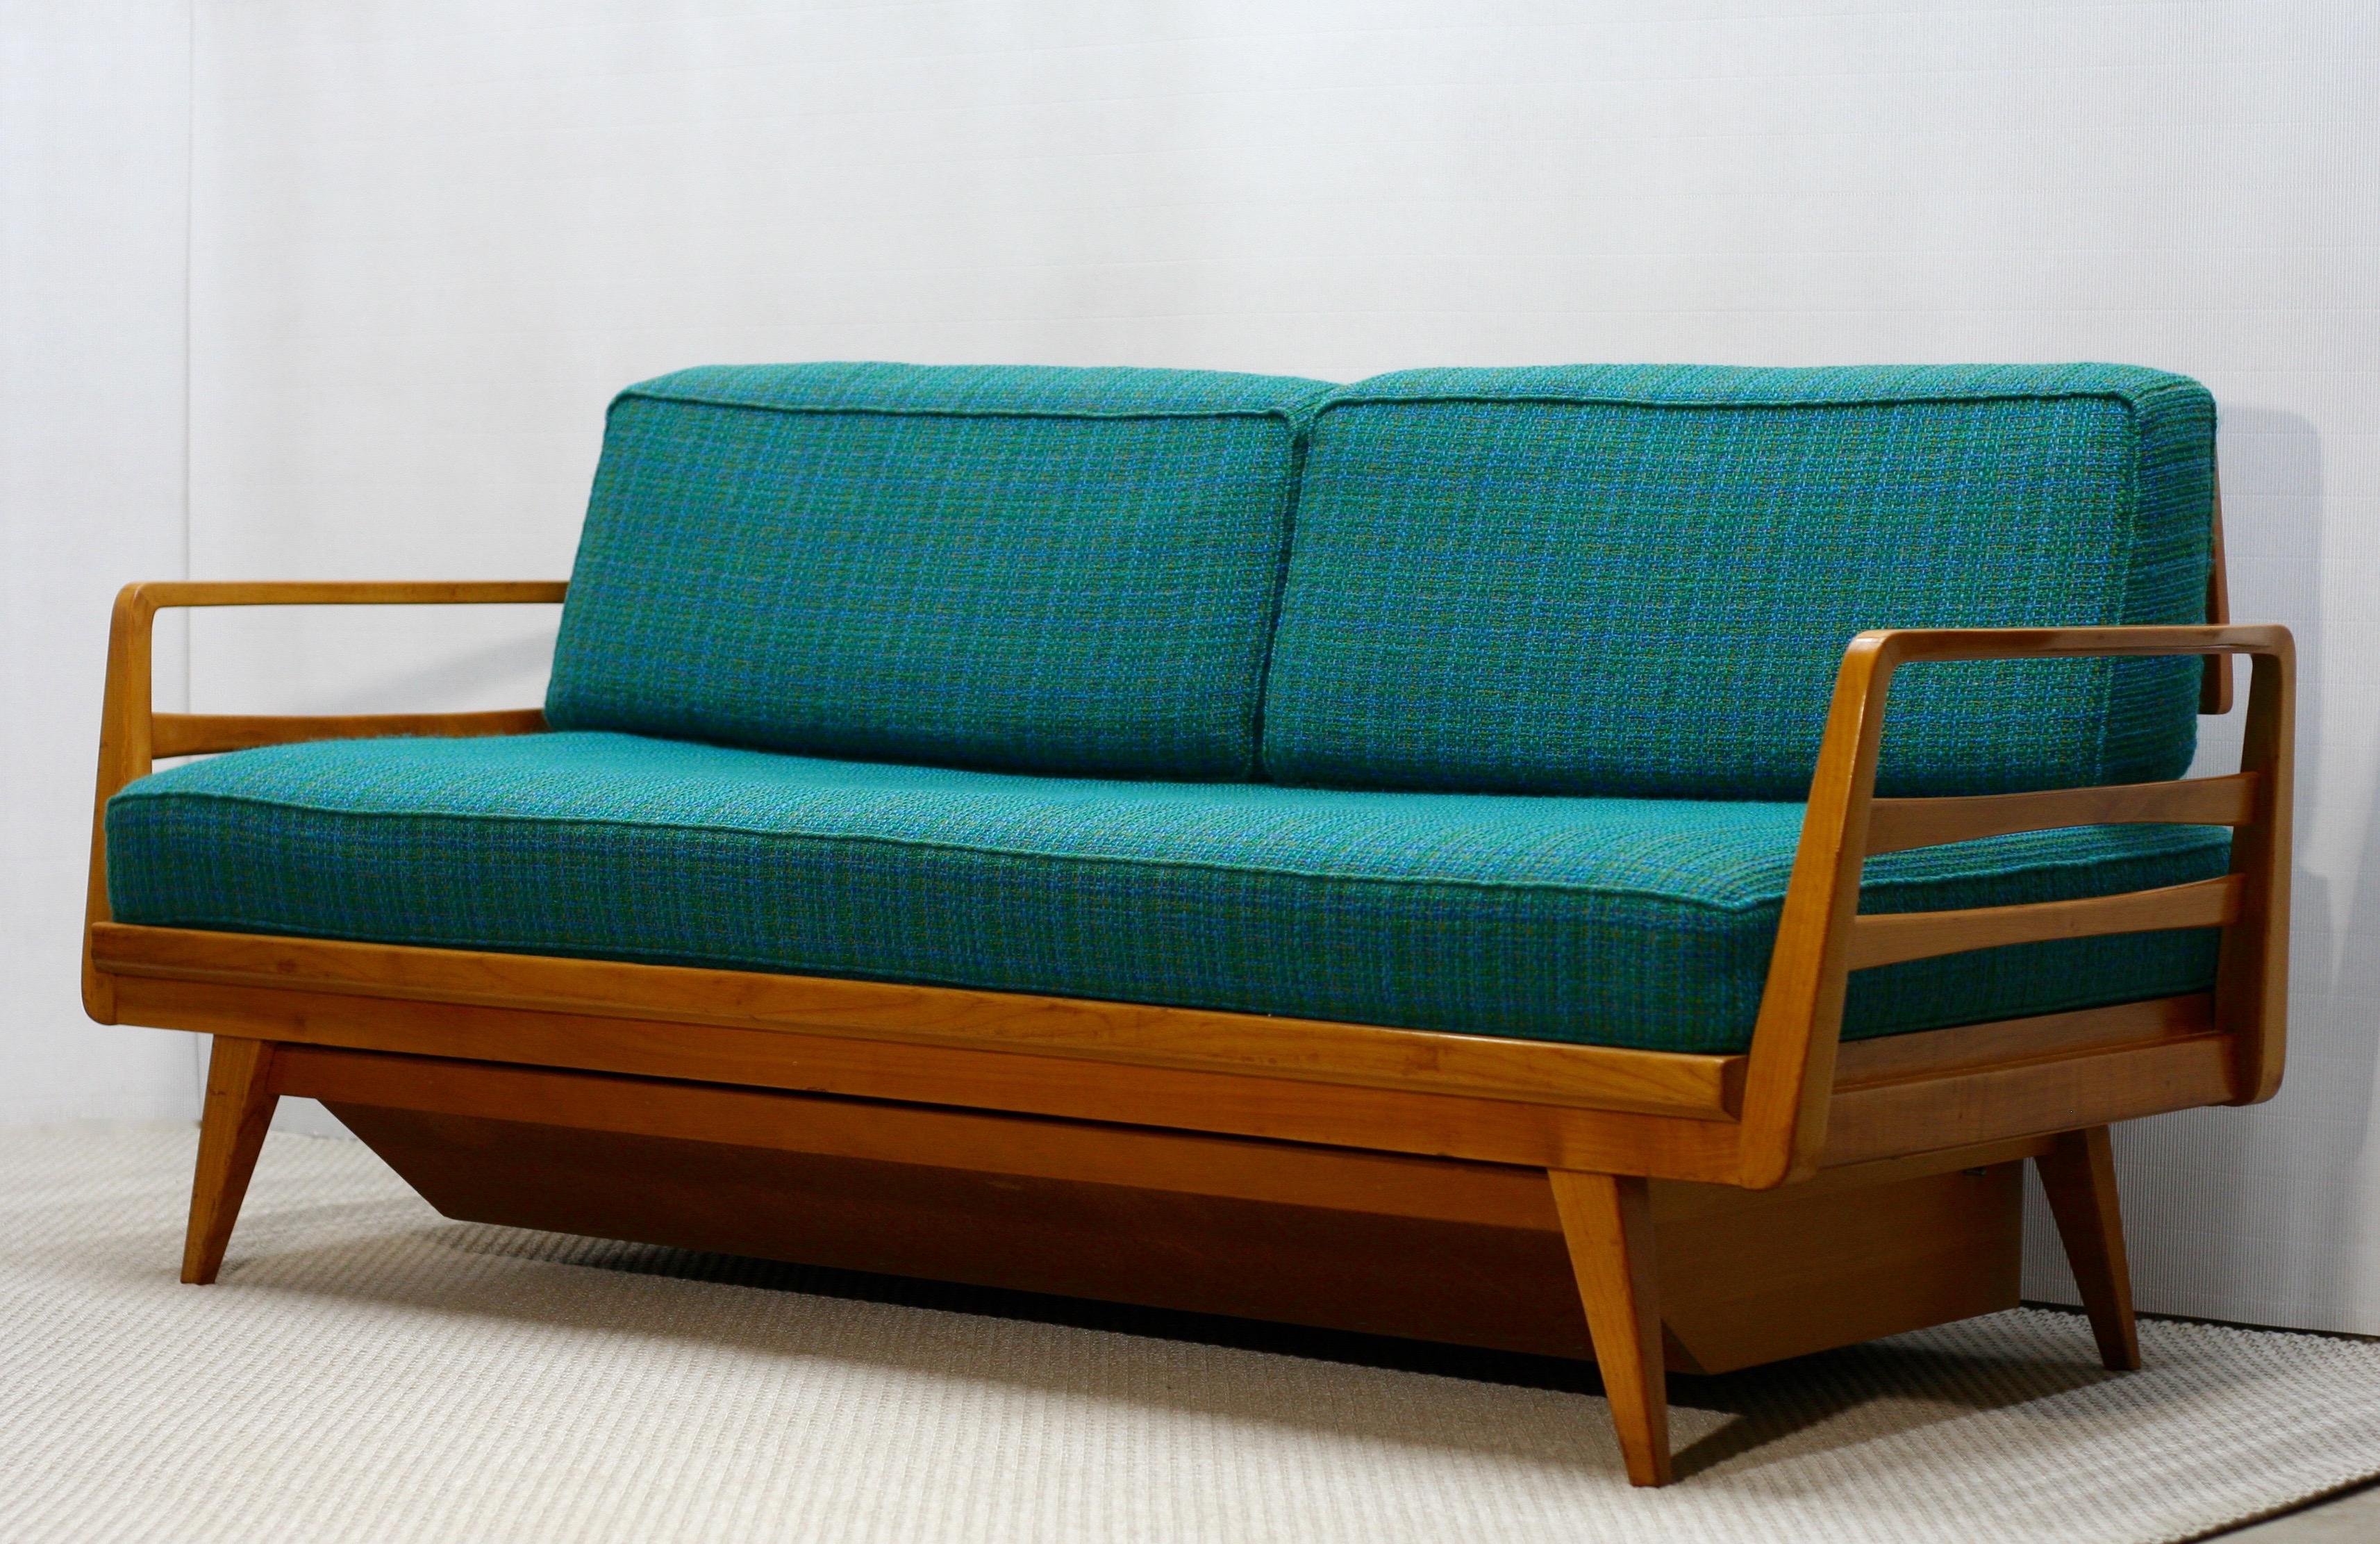 Freestanding model by Walter/Wilhelm Knoll from 1950s. Daybed has an adjustable backrest and an extendable armrest, also it features a box for bedding. Fully original bouclé fabric upholstery with very comfortable spring cushions. 

DAYBED